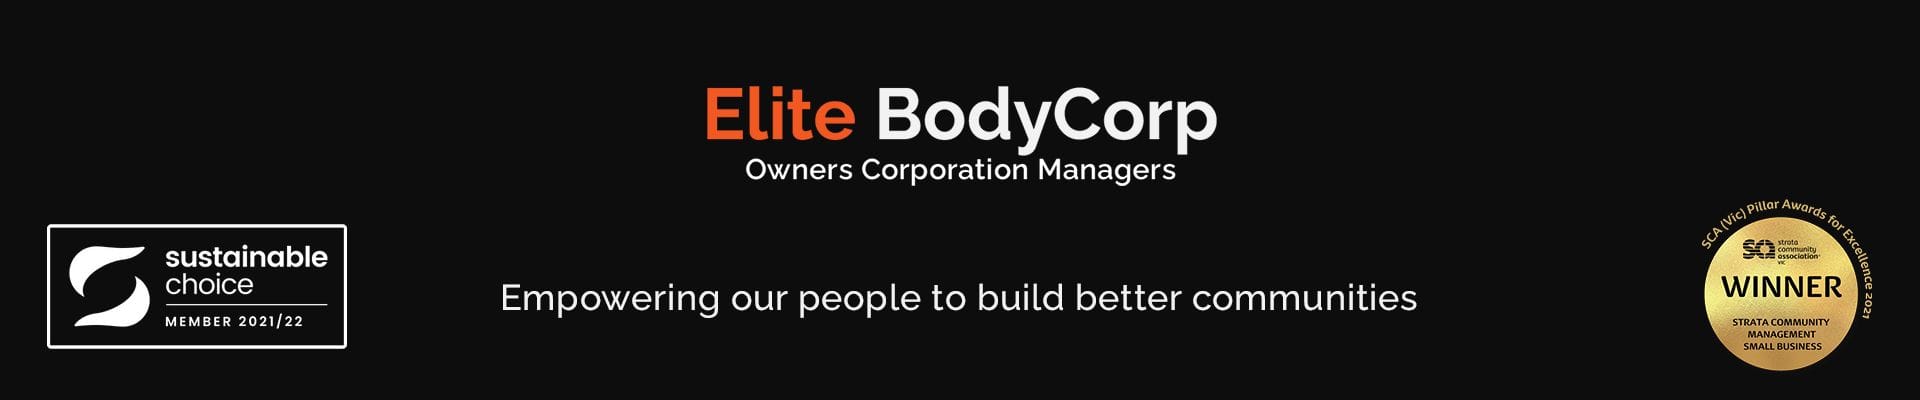 Elite Bodycorp | Owners Corporation Management